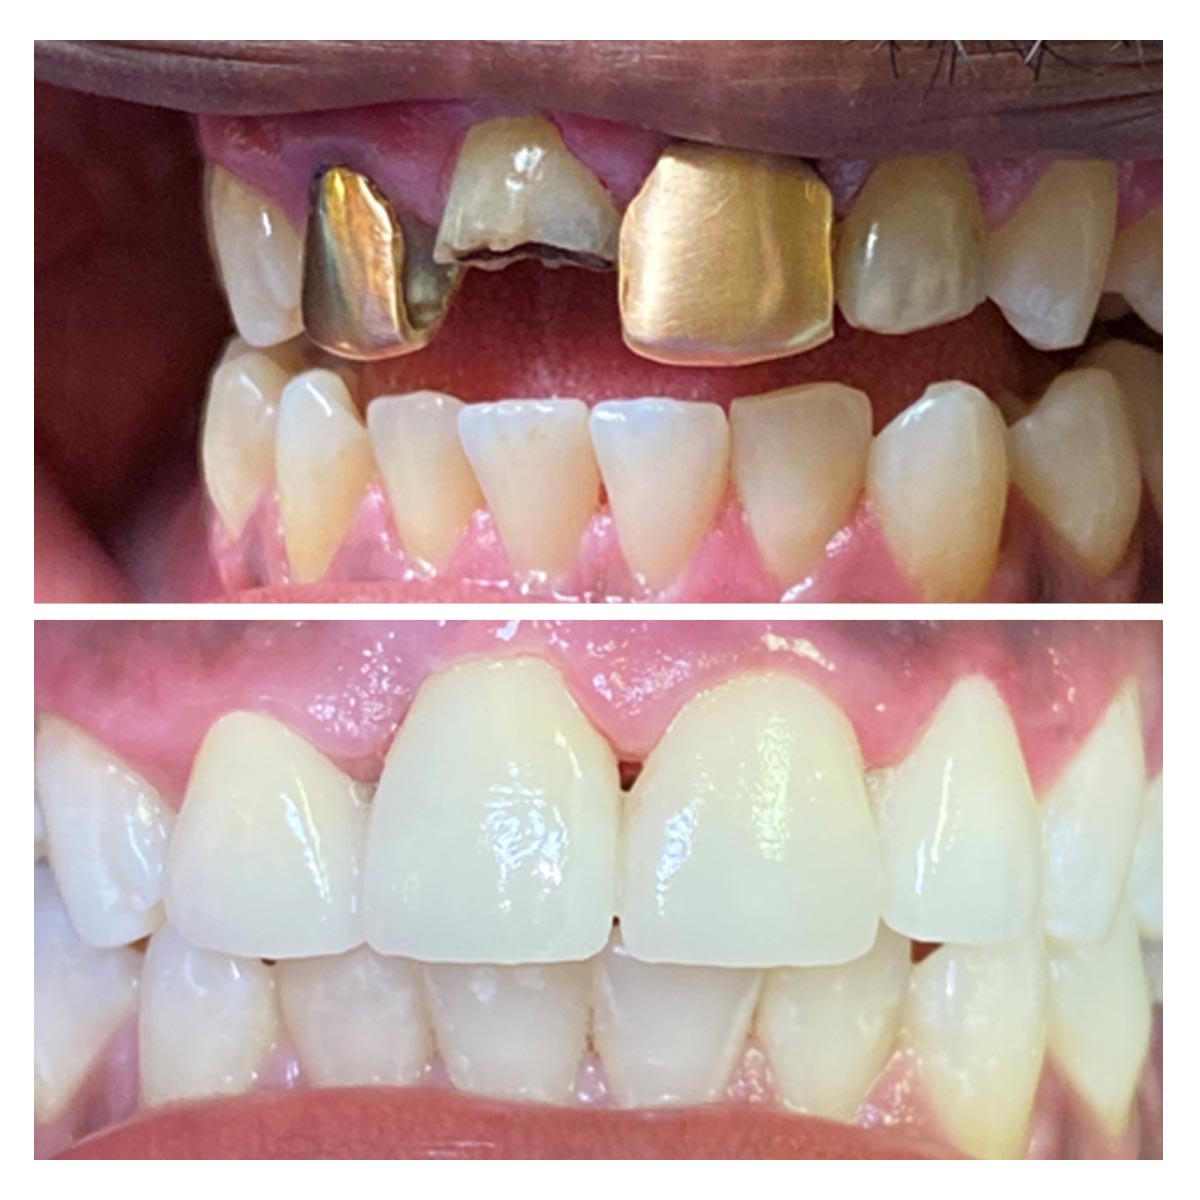 dr-verma-before-after (8)